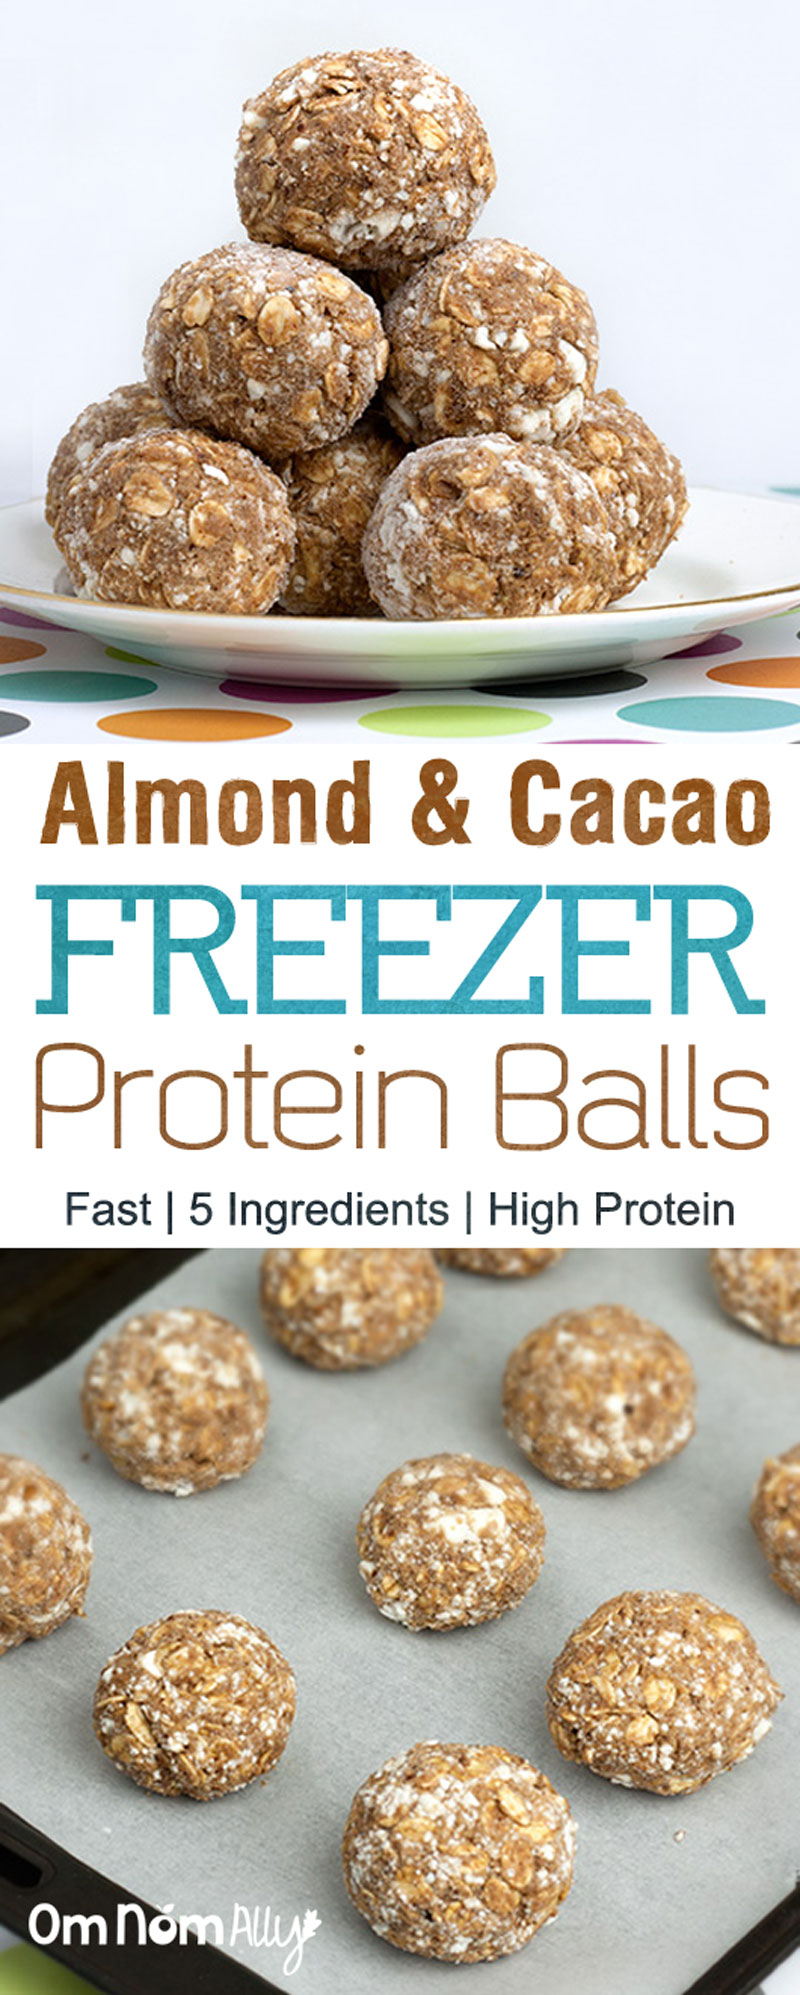 Almond & Cacao Freezer Protein Balls @OmNomAlly - If you want easy, home-made protein balls with only five superfood, wholegrain, nut and dairy ingredients - you've found the right recipe!